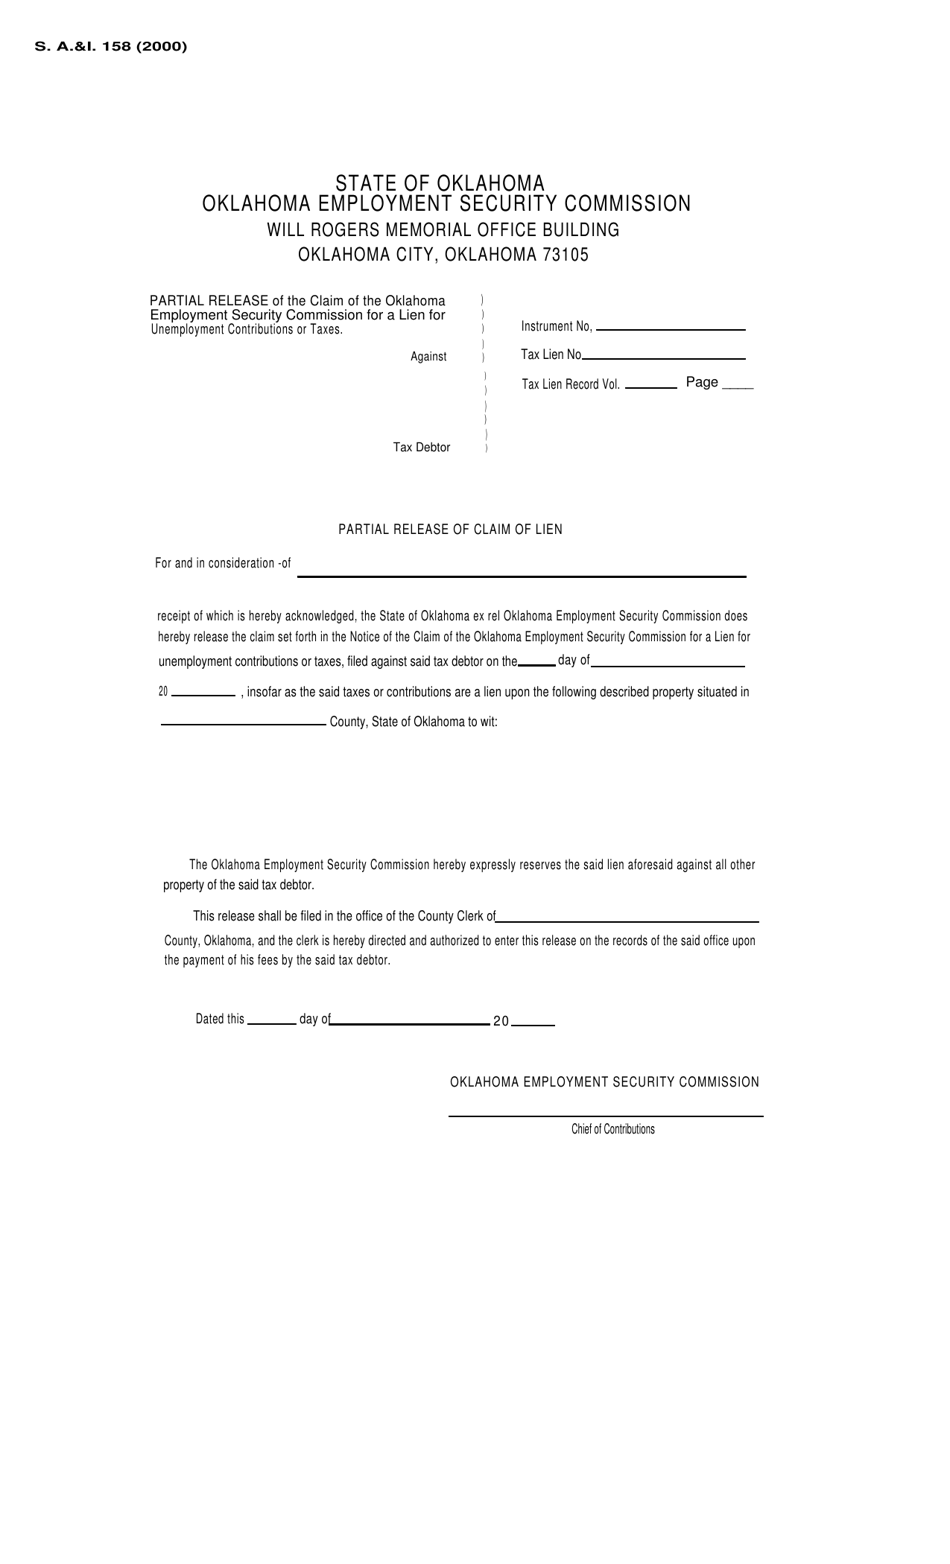 Form S.A. I.158 Partial Release of Claim of Lien - Oklahoma, Page 1